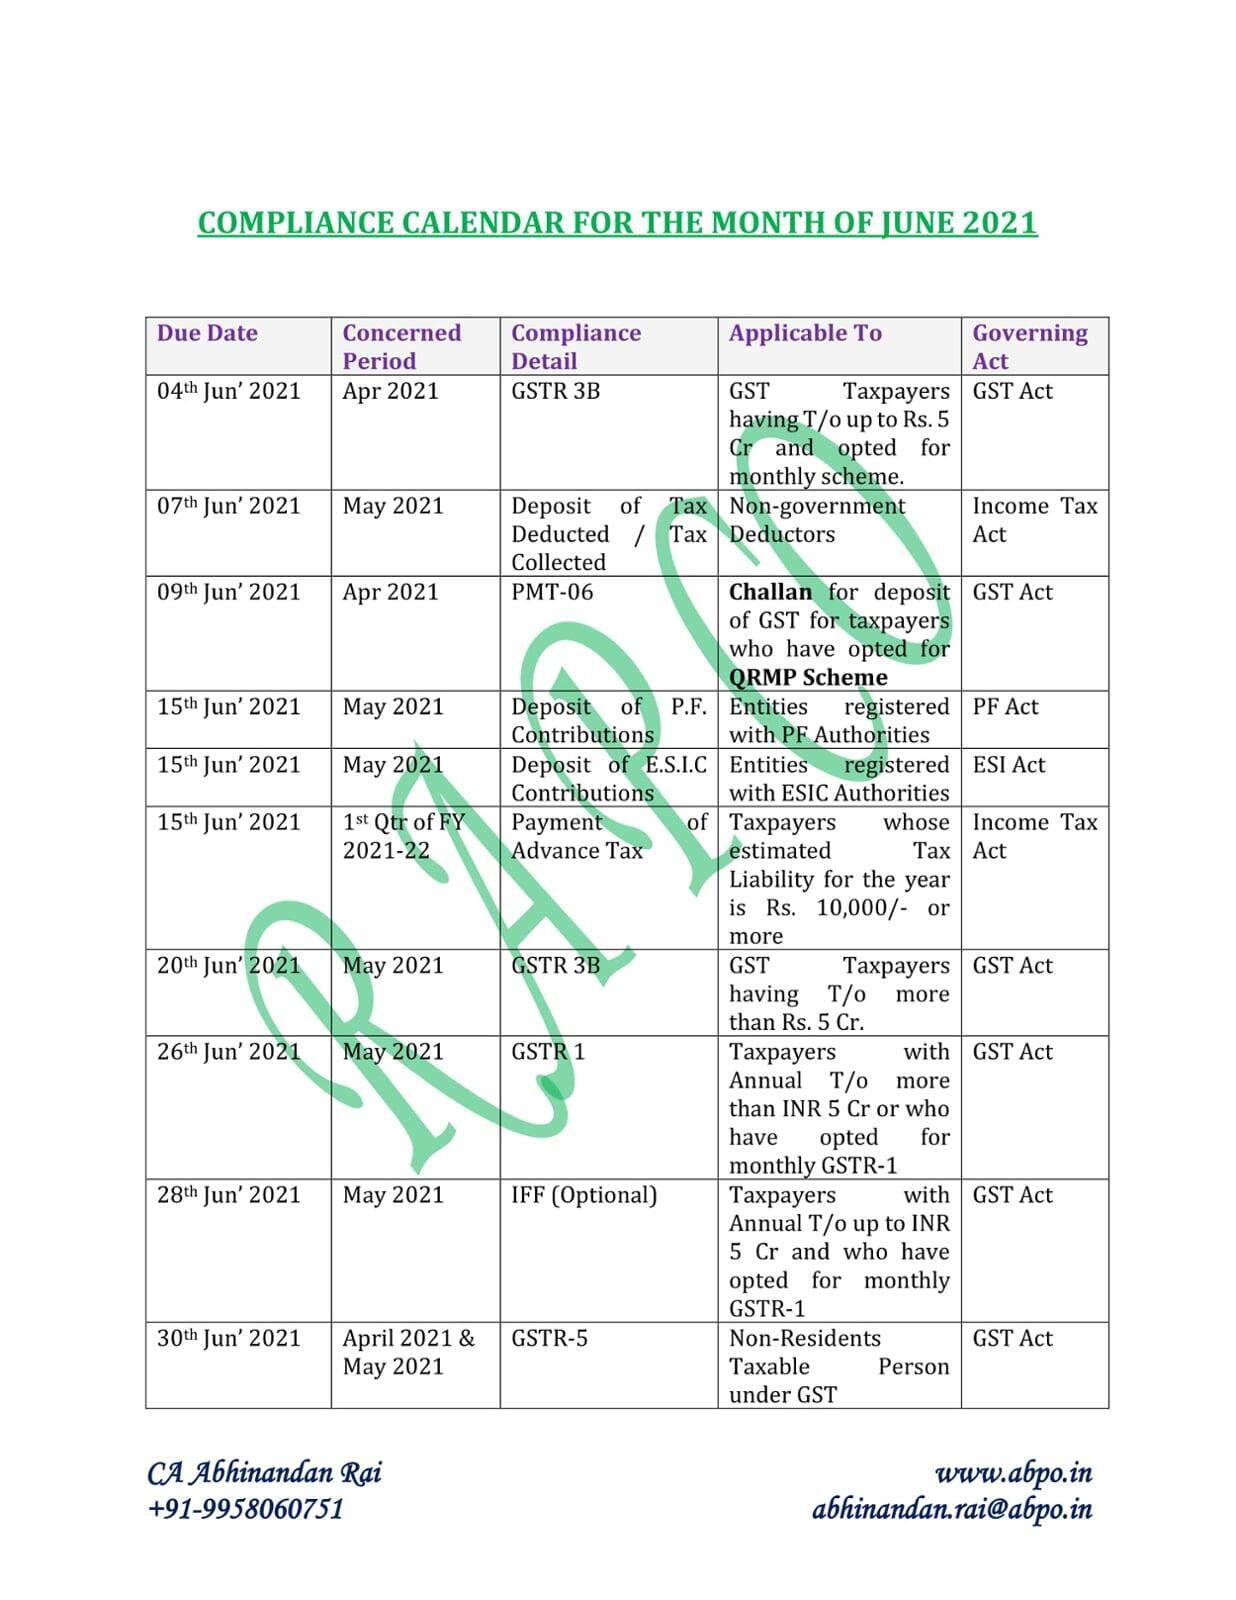 COMPLIANCE CALENDAR FOR THE MONTH OF JUNE 2021